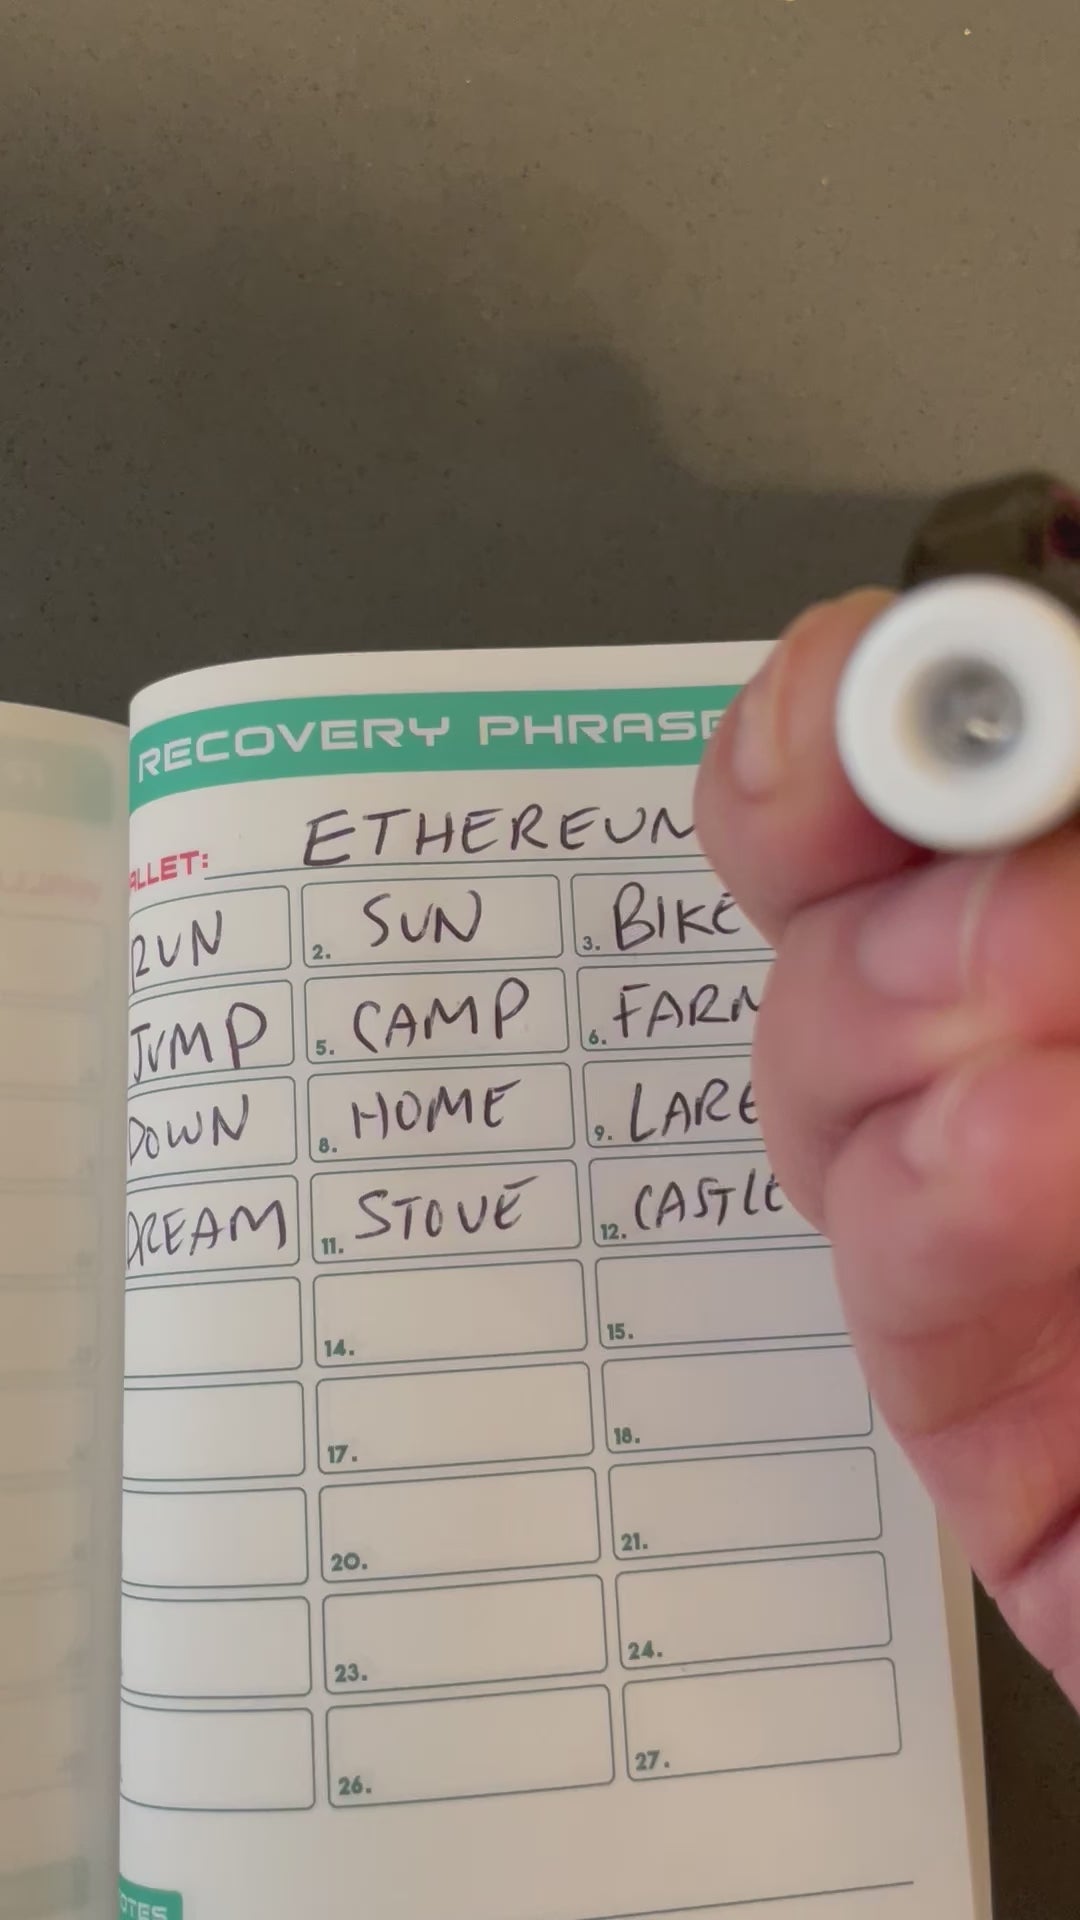 Demonstration of the ghost pen revealing invisible ink text with the built in UV light on the stonebook. Great way to hide ethereum seed phrases